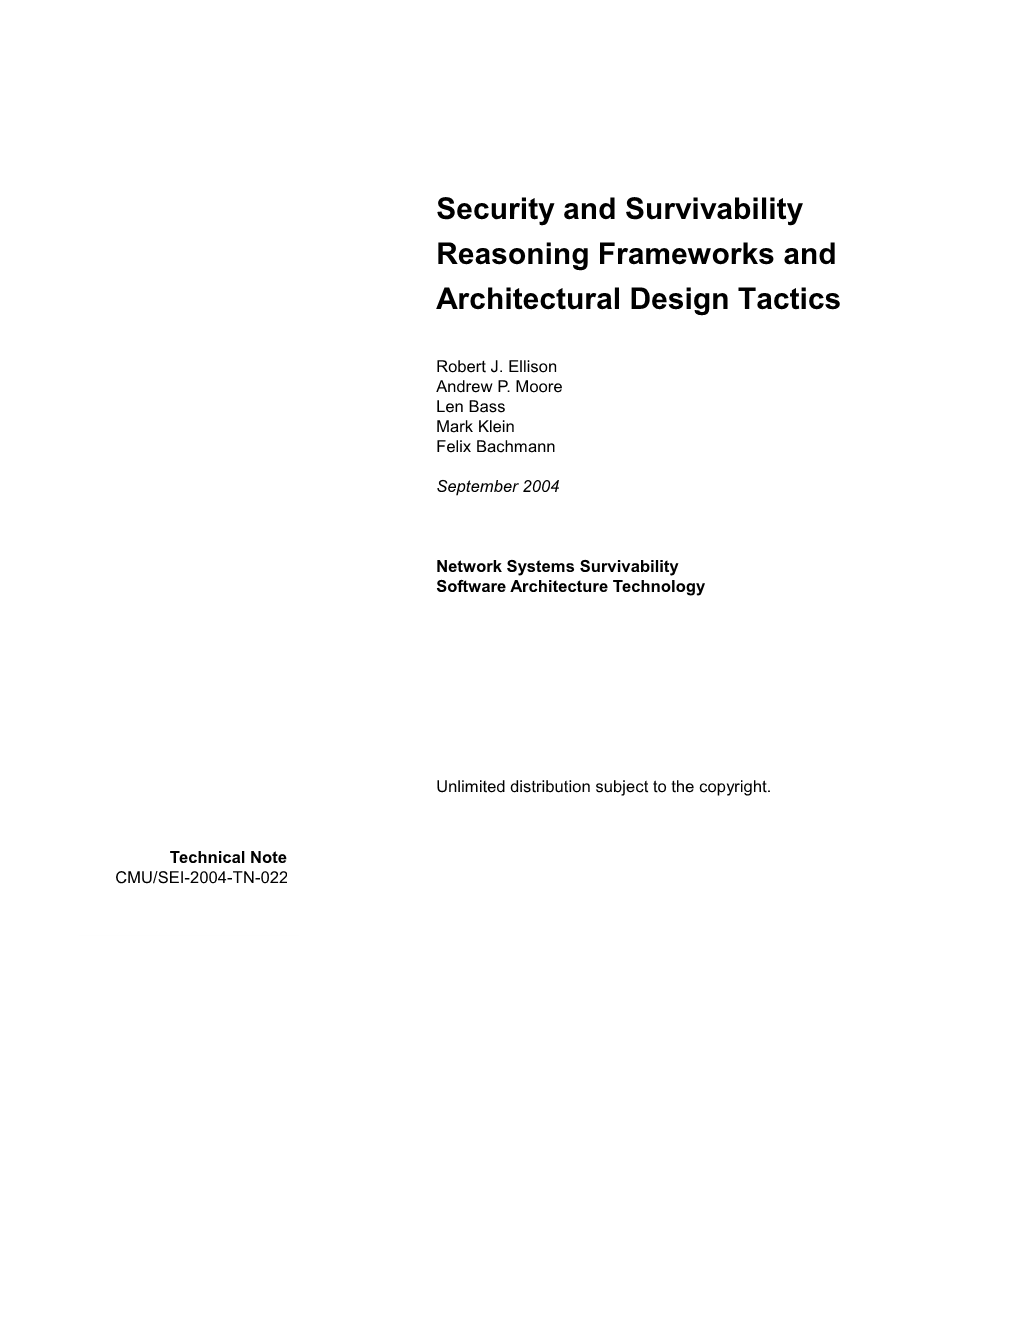 Security and Survivability Reasoning Frameworks and Architectural Design Tactics